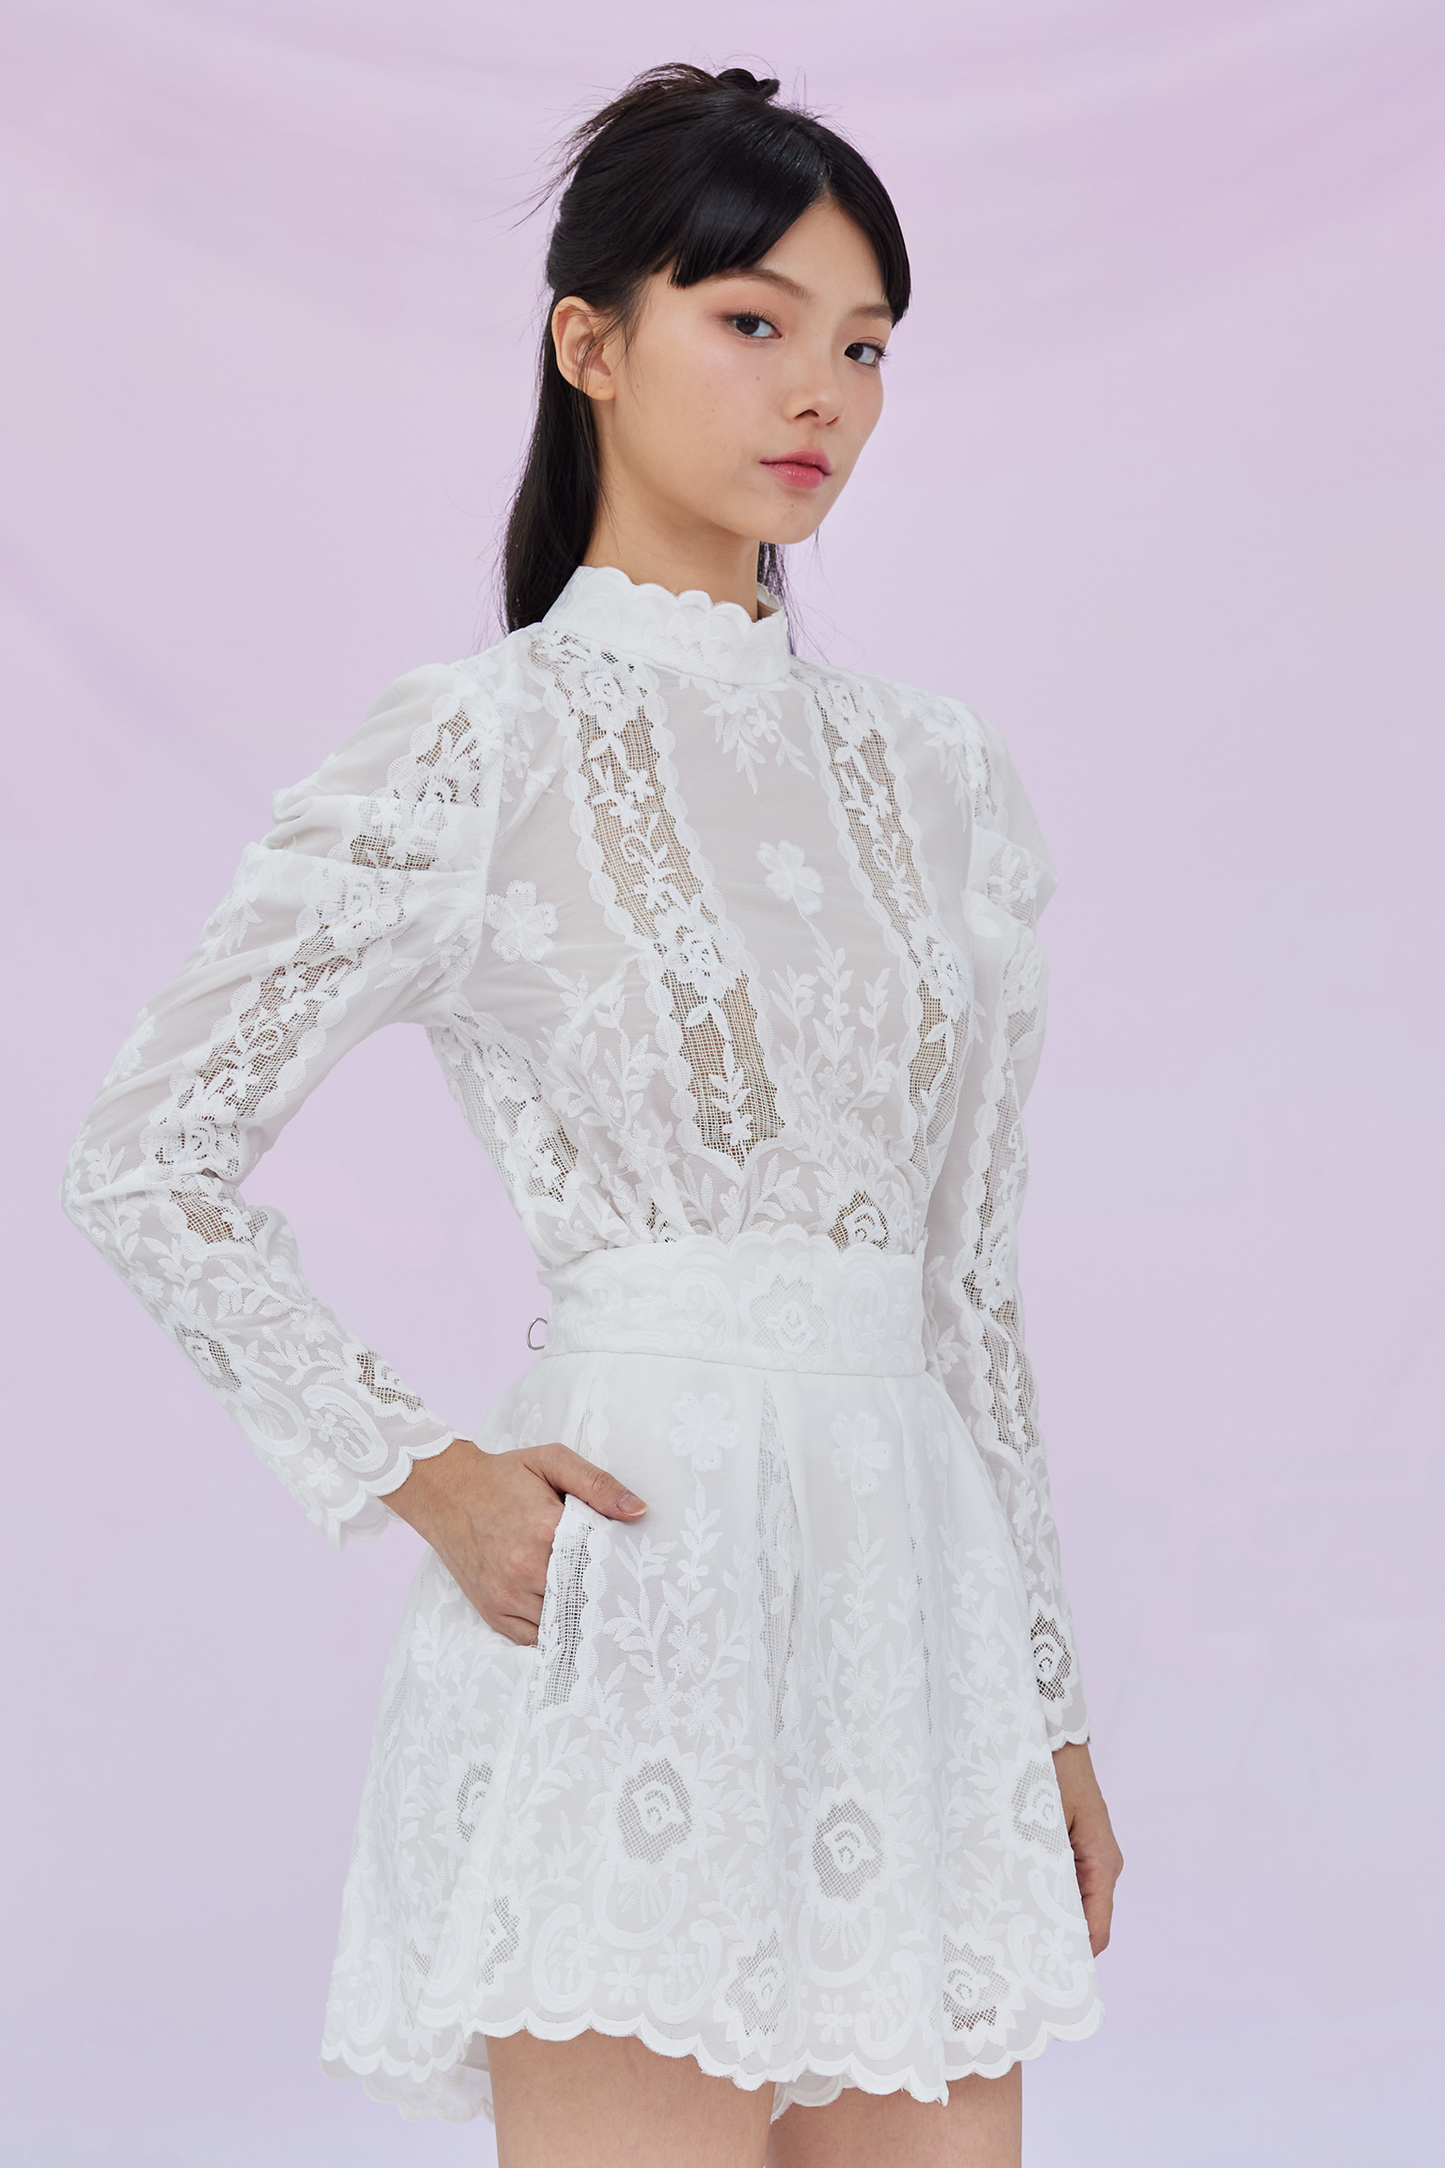 Grethel White Lace Long Sleeve Top